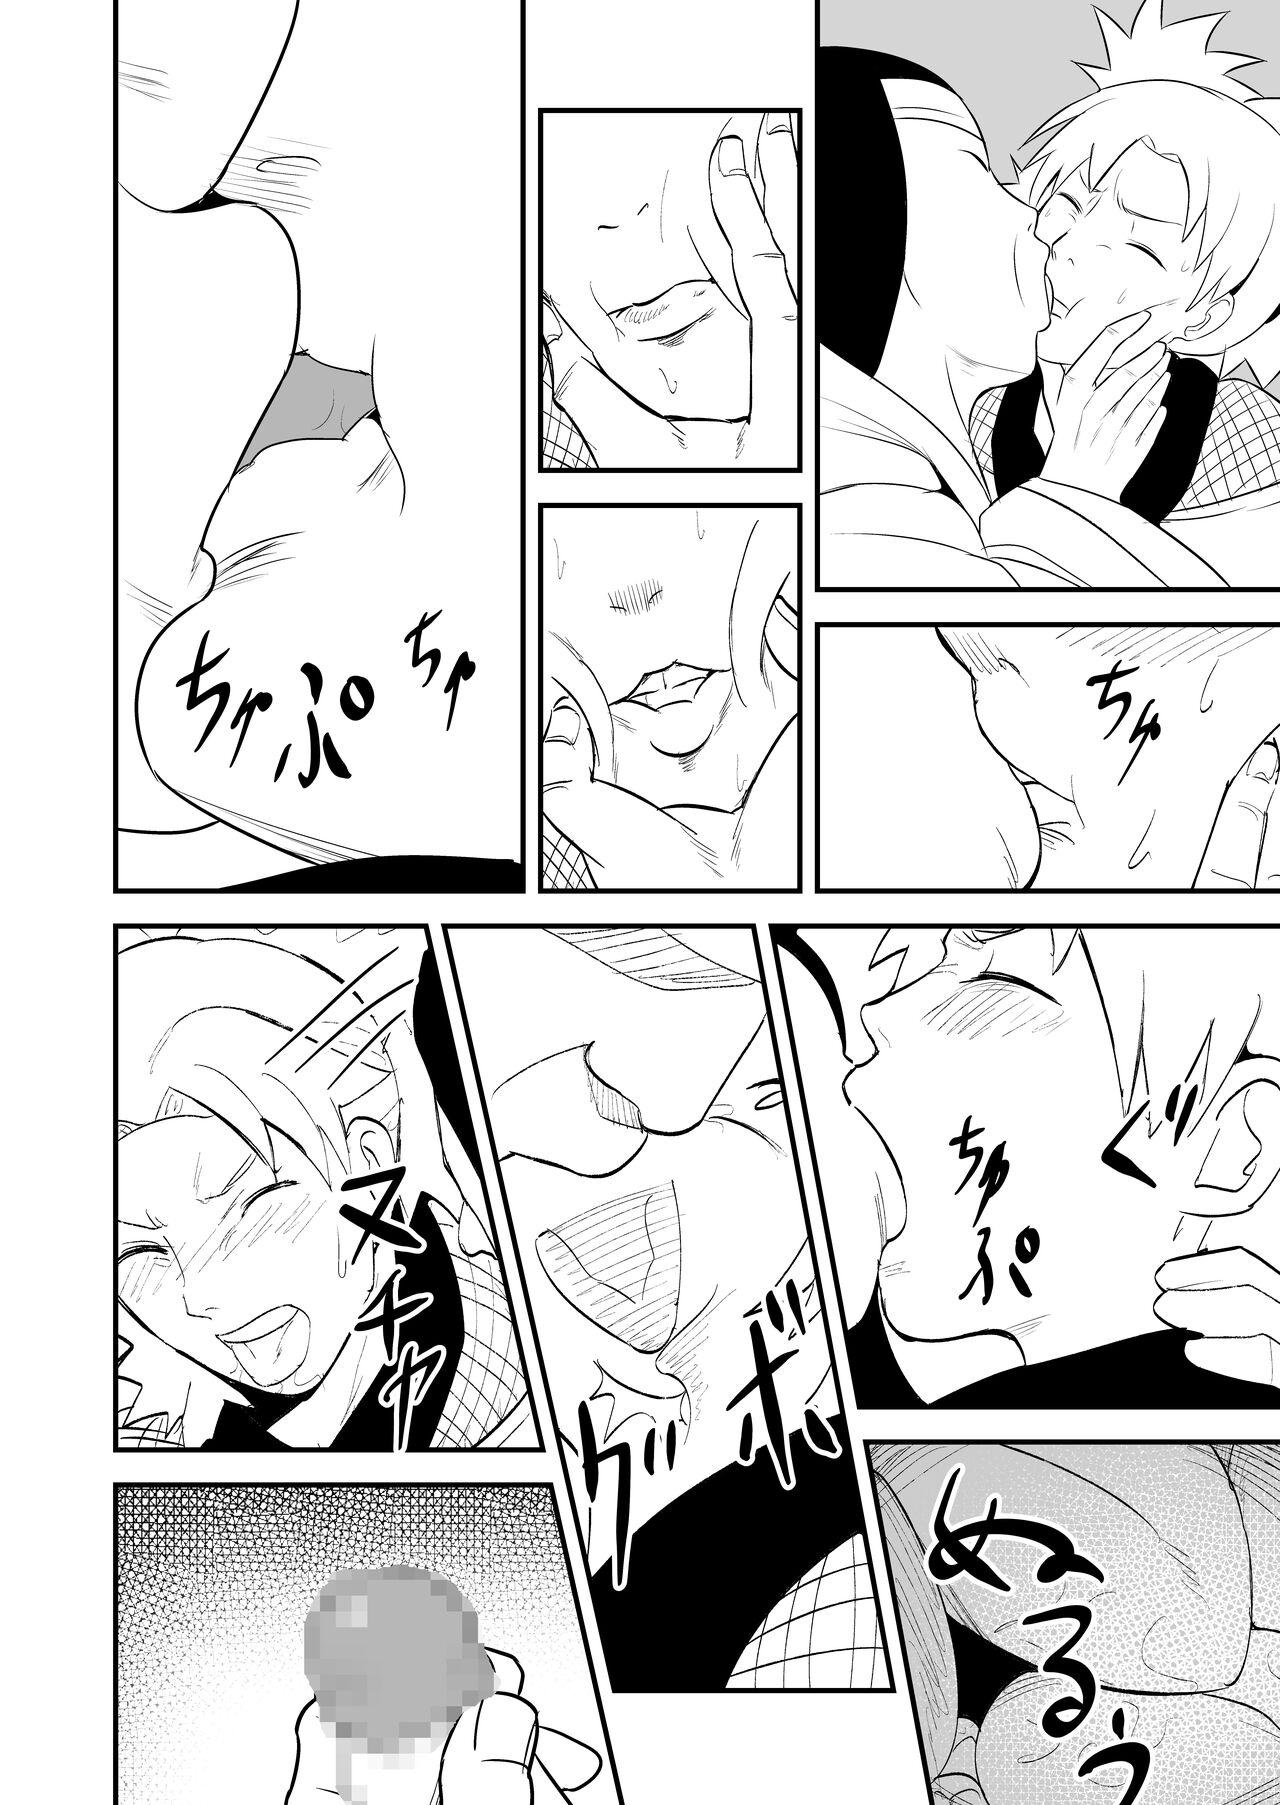 3way 無限月読シリーズ テマリ - Naruto Blowjob - Picture 2